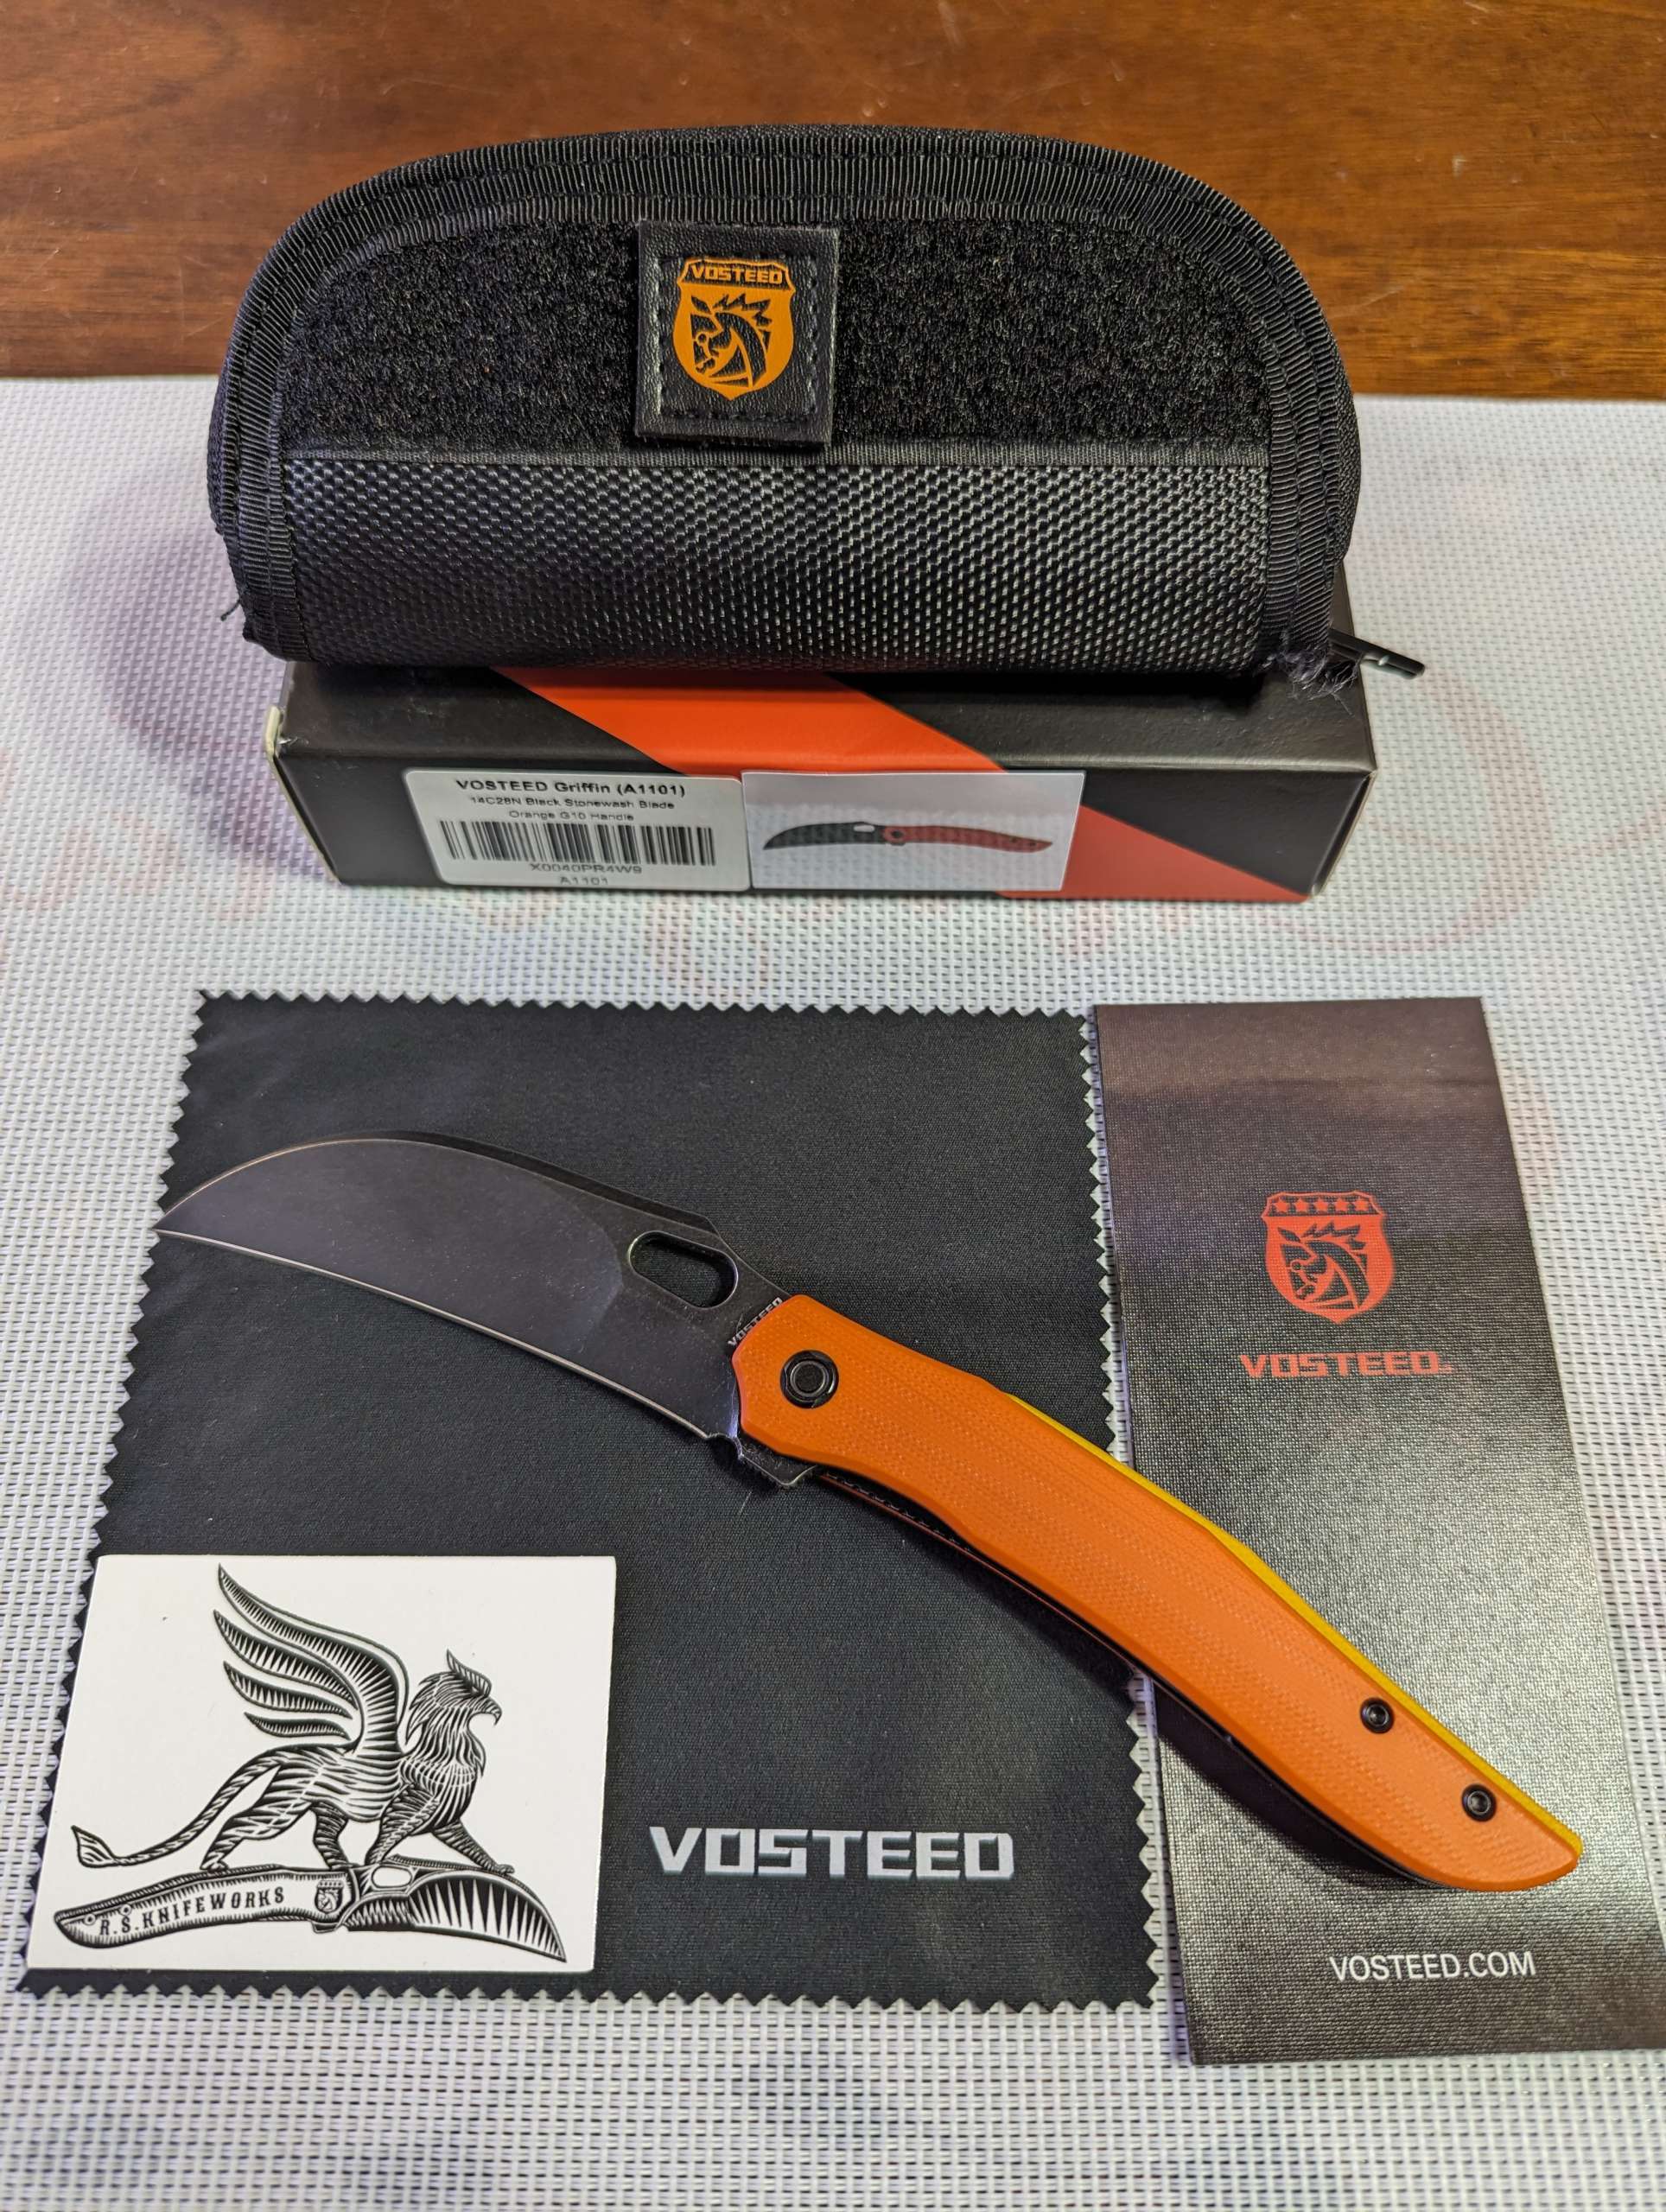 Vosteed Griffin 02 scaled